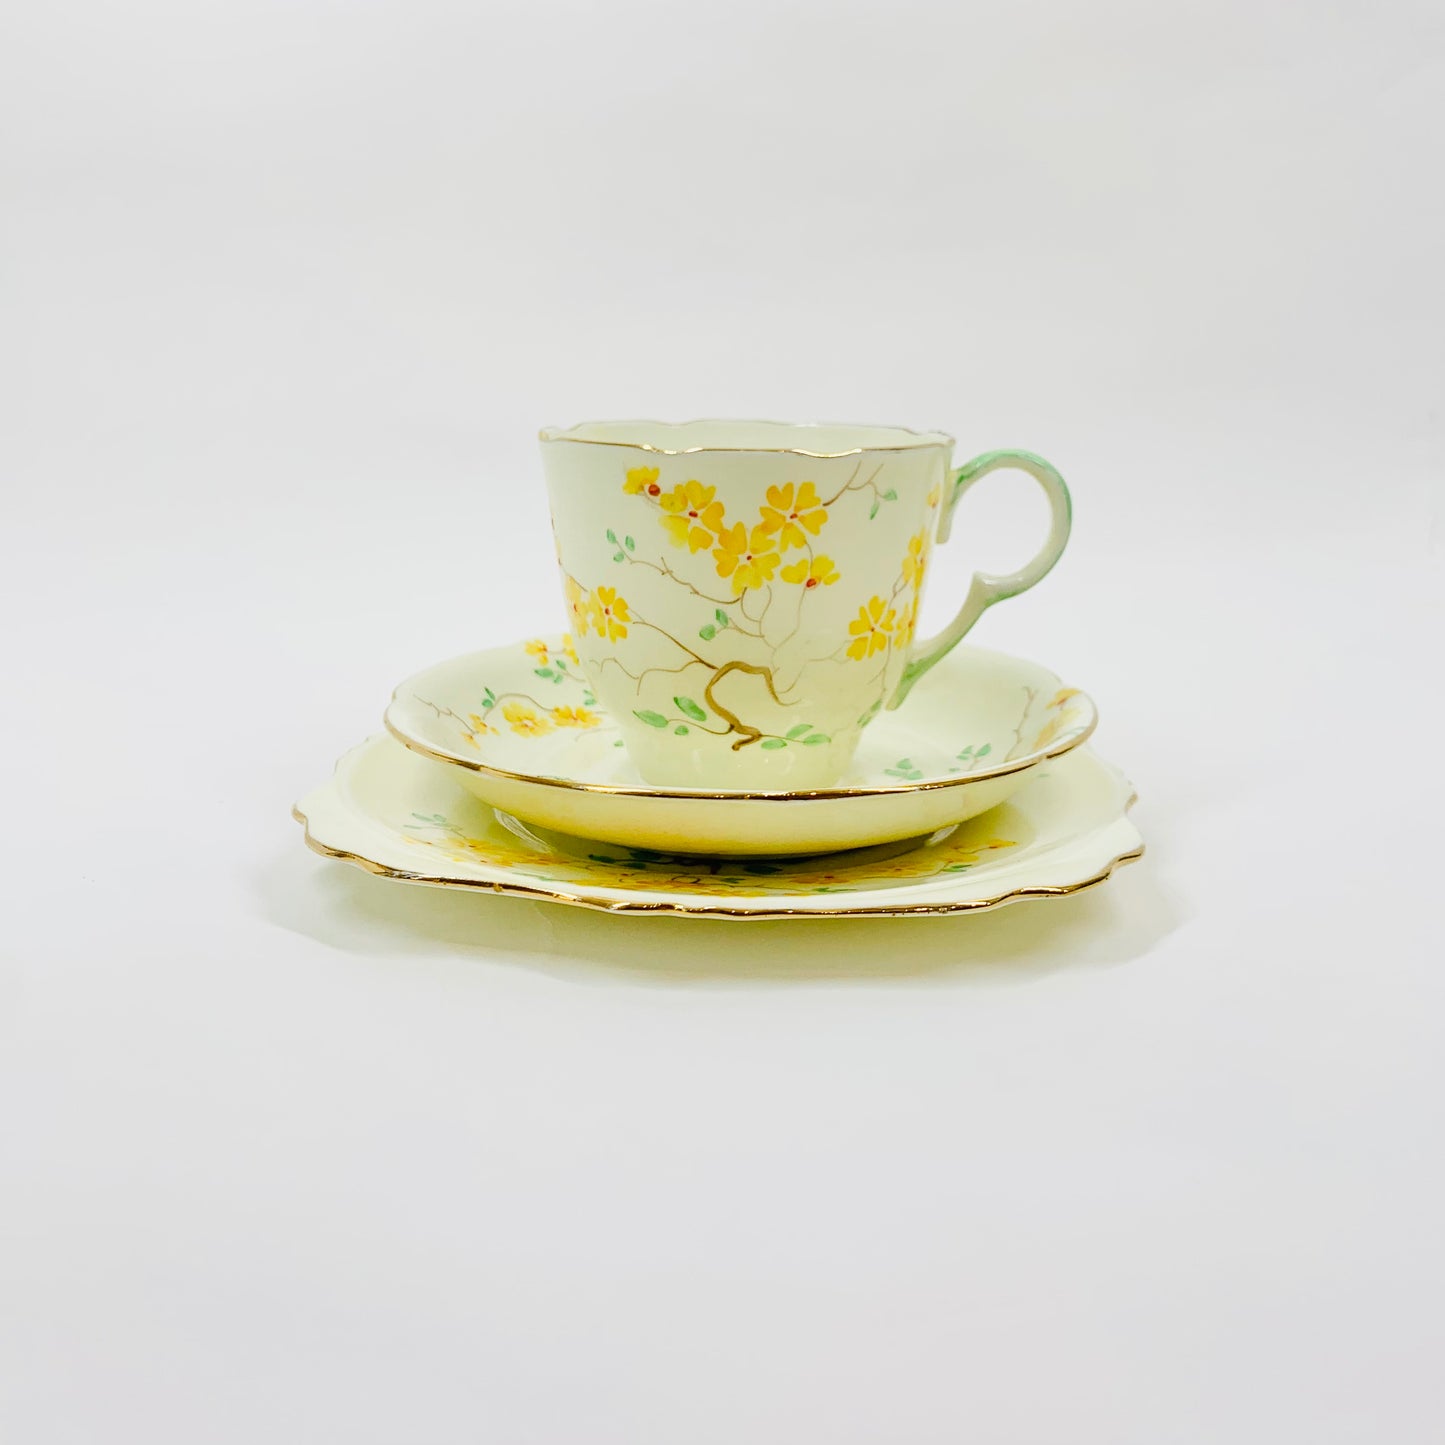 Antique Art Deco hand painted Grafton fine China tea cup and matching saucer and cake plate